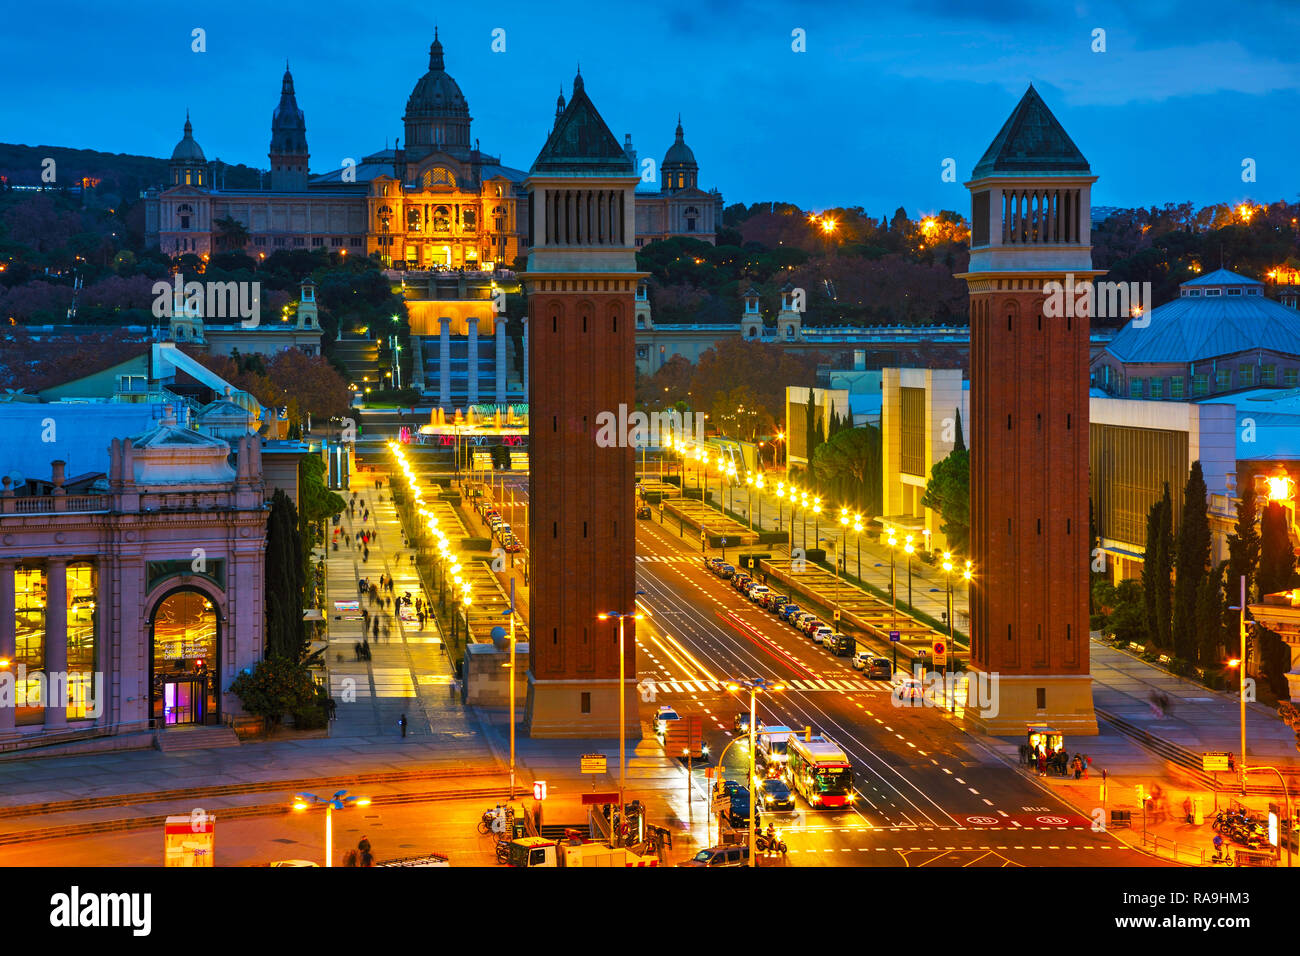 Aerial overview on Plaza Espanya in Barcelona, Spain at night Stock Photo